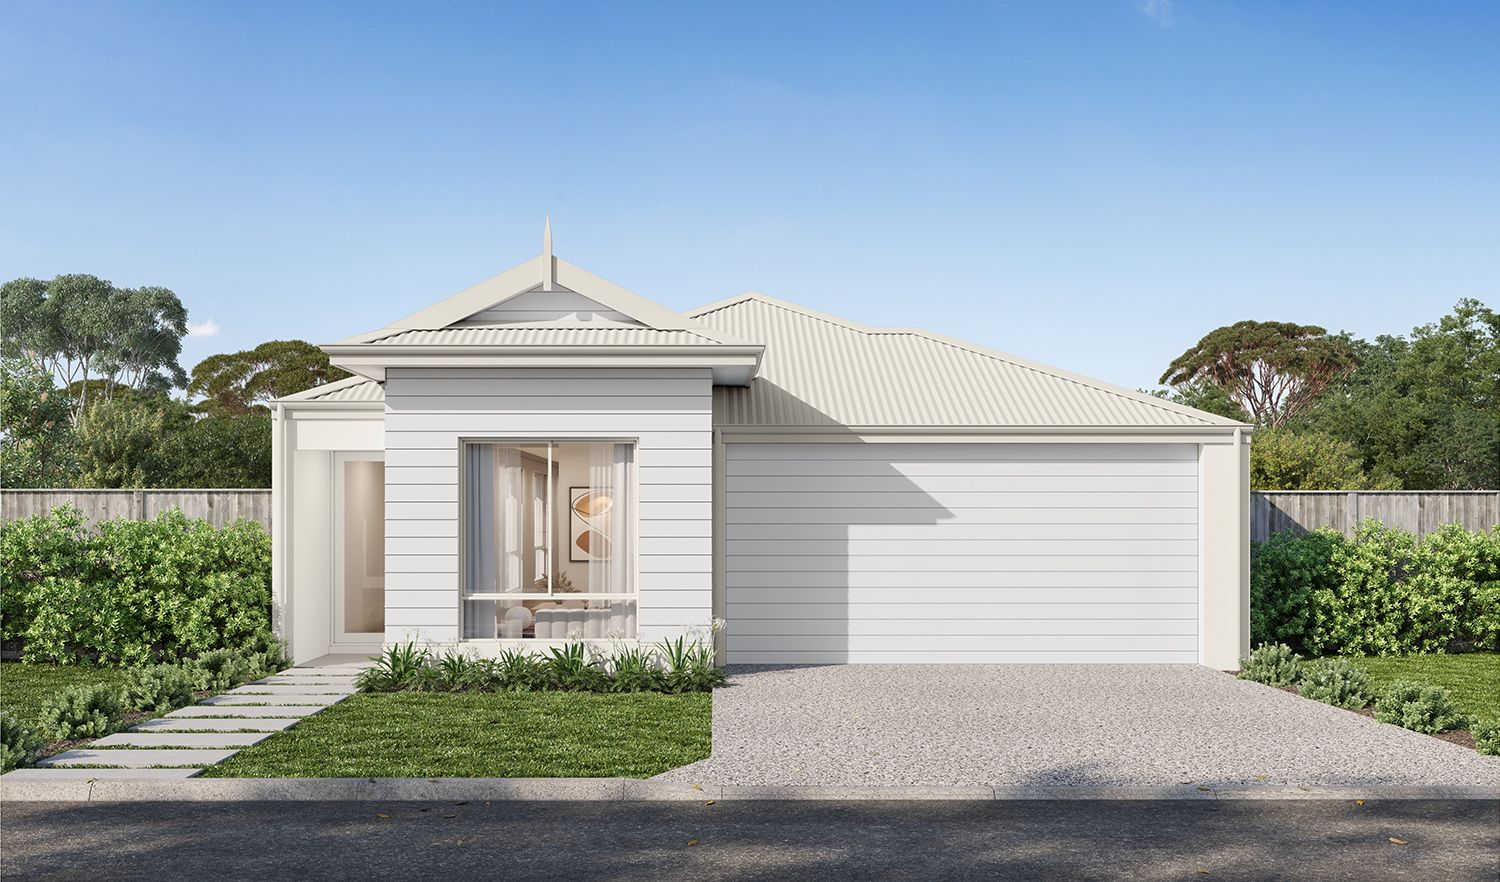 3 bedrooms New House & Land in Lot 2465 Beaumont Crescent MINDARIE WA, 6030